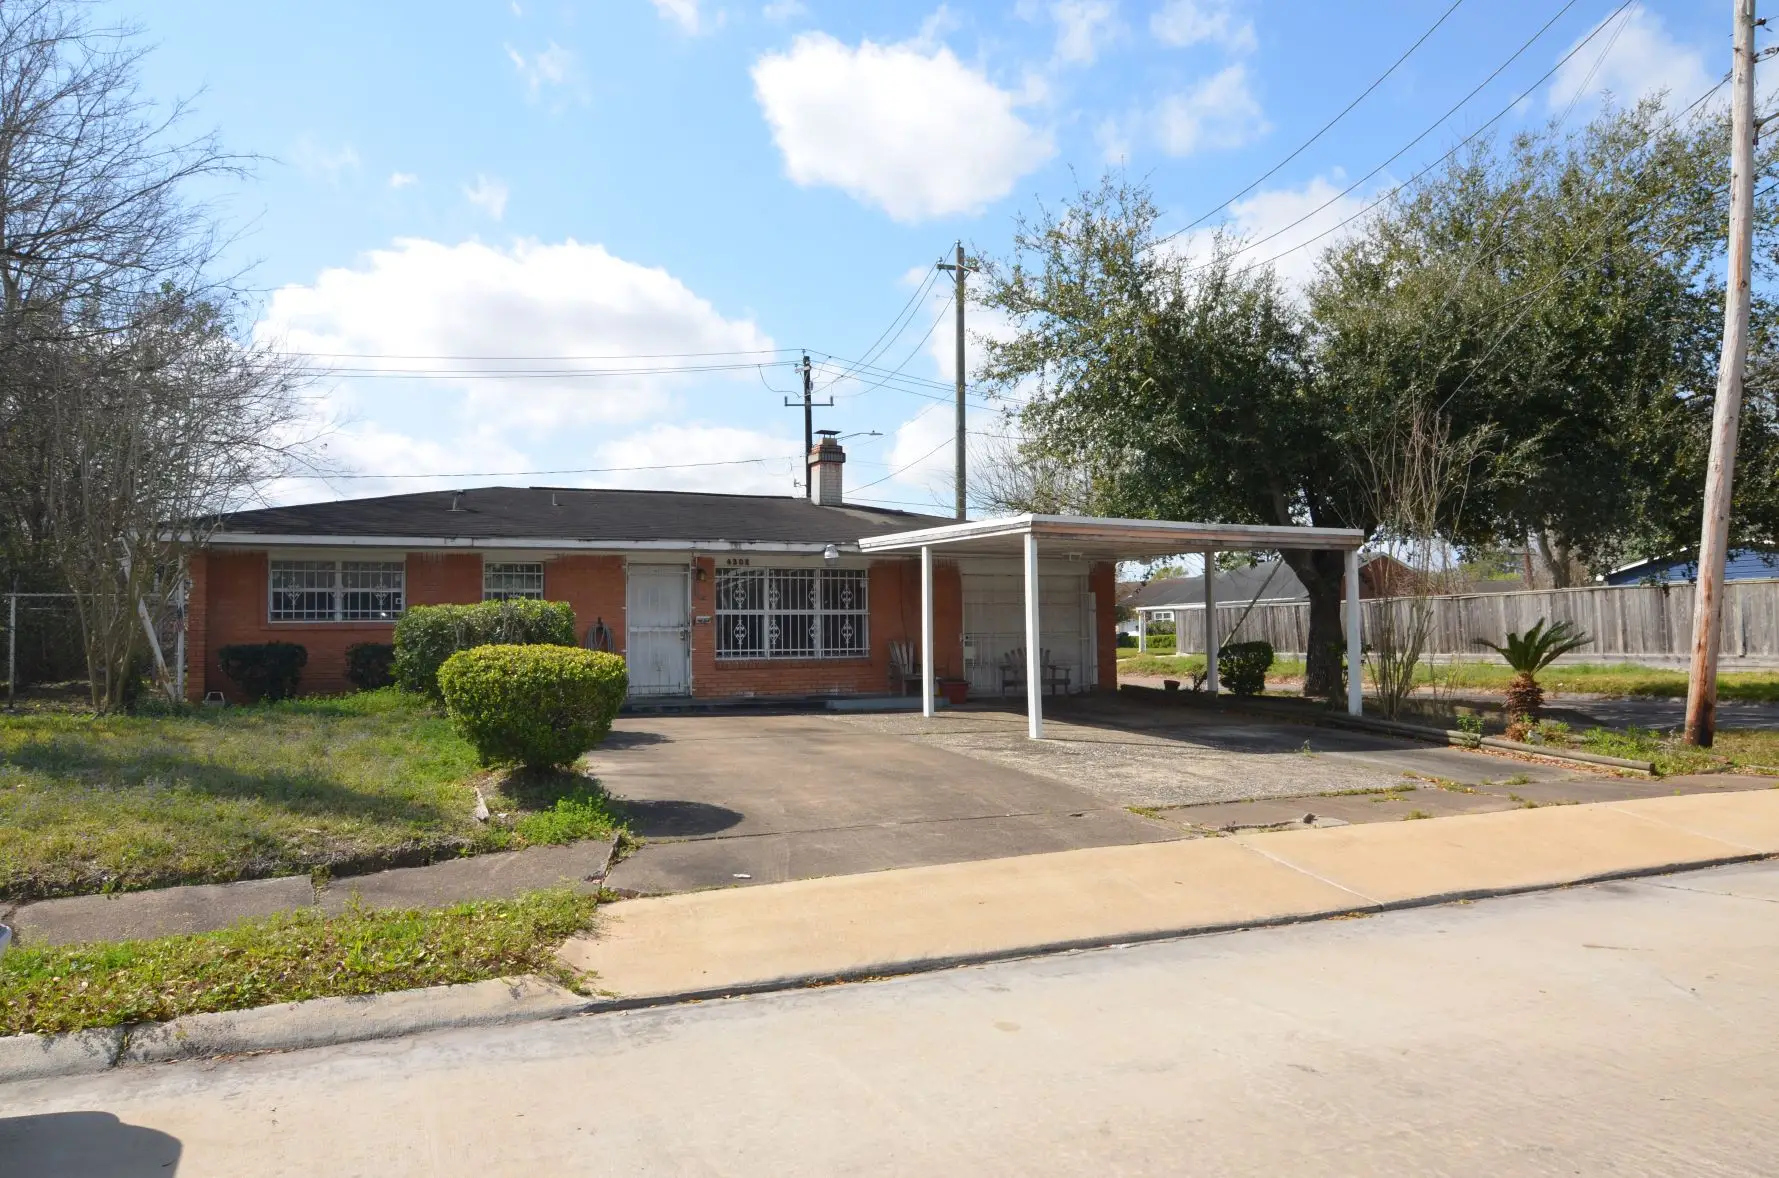 3 Bedroom Investment Opportunity, Near The Medical Center